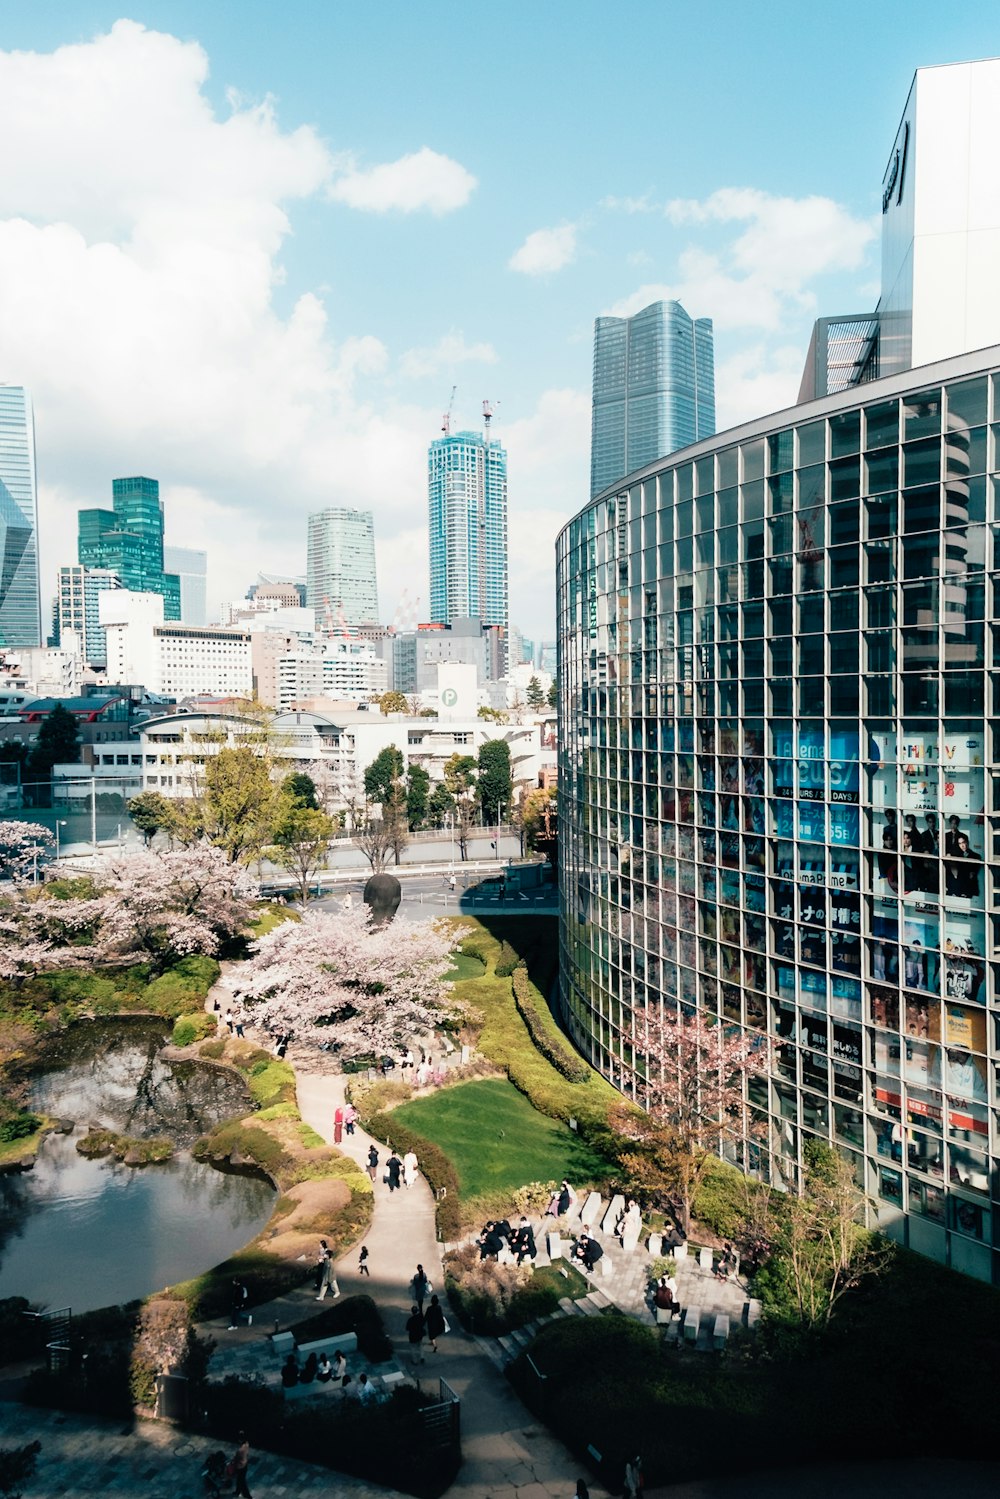 a view of a city with cherry blossoms in bloom